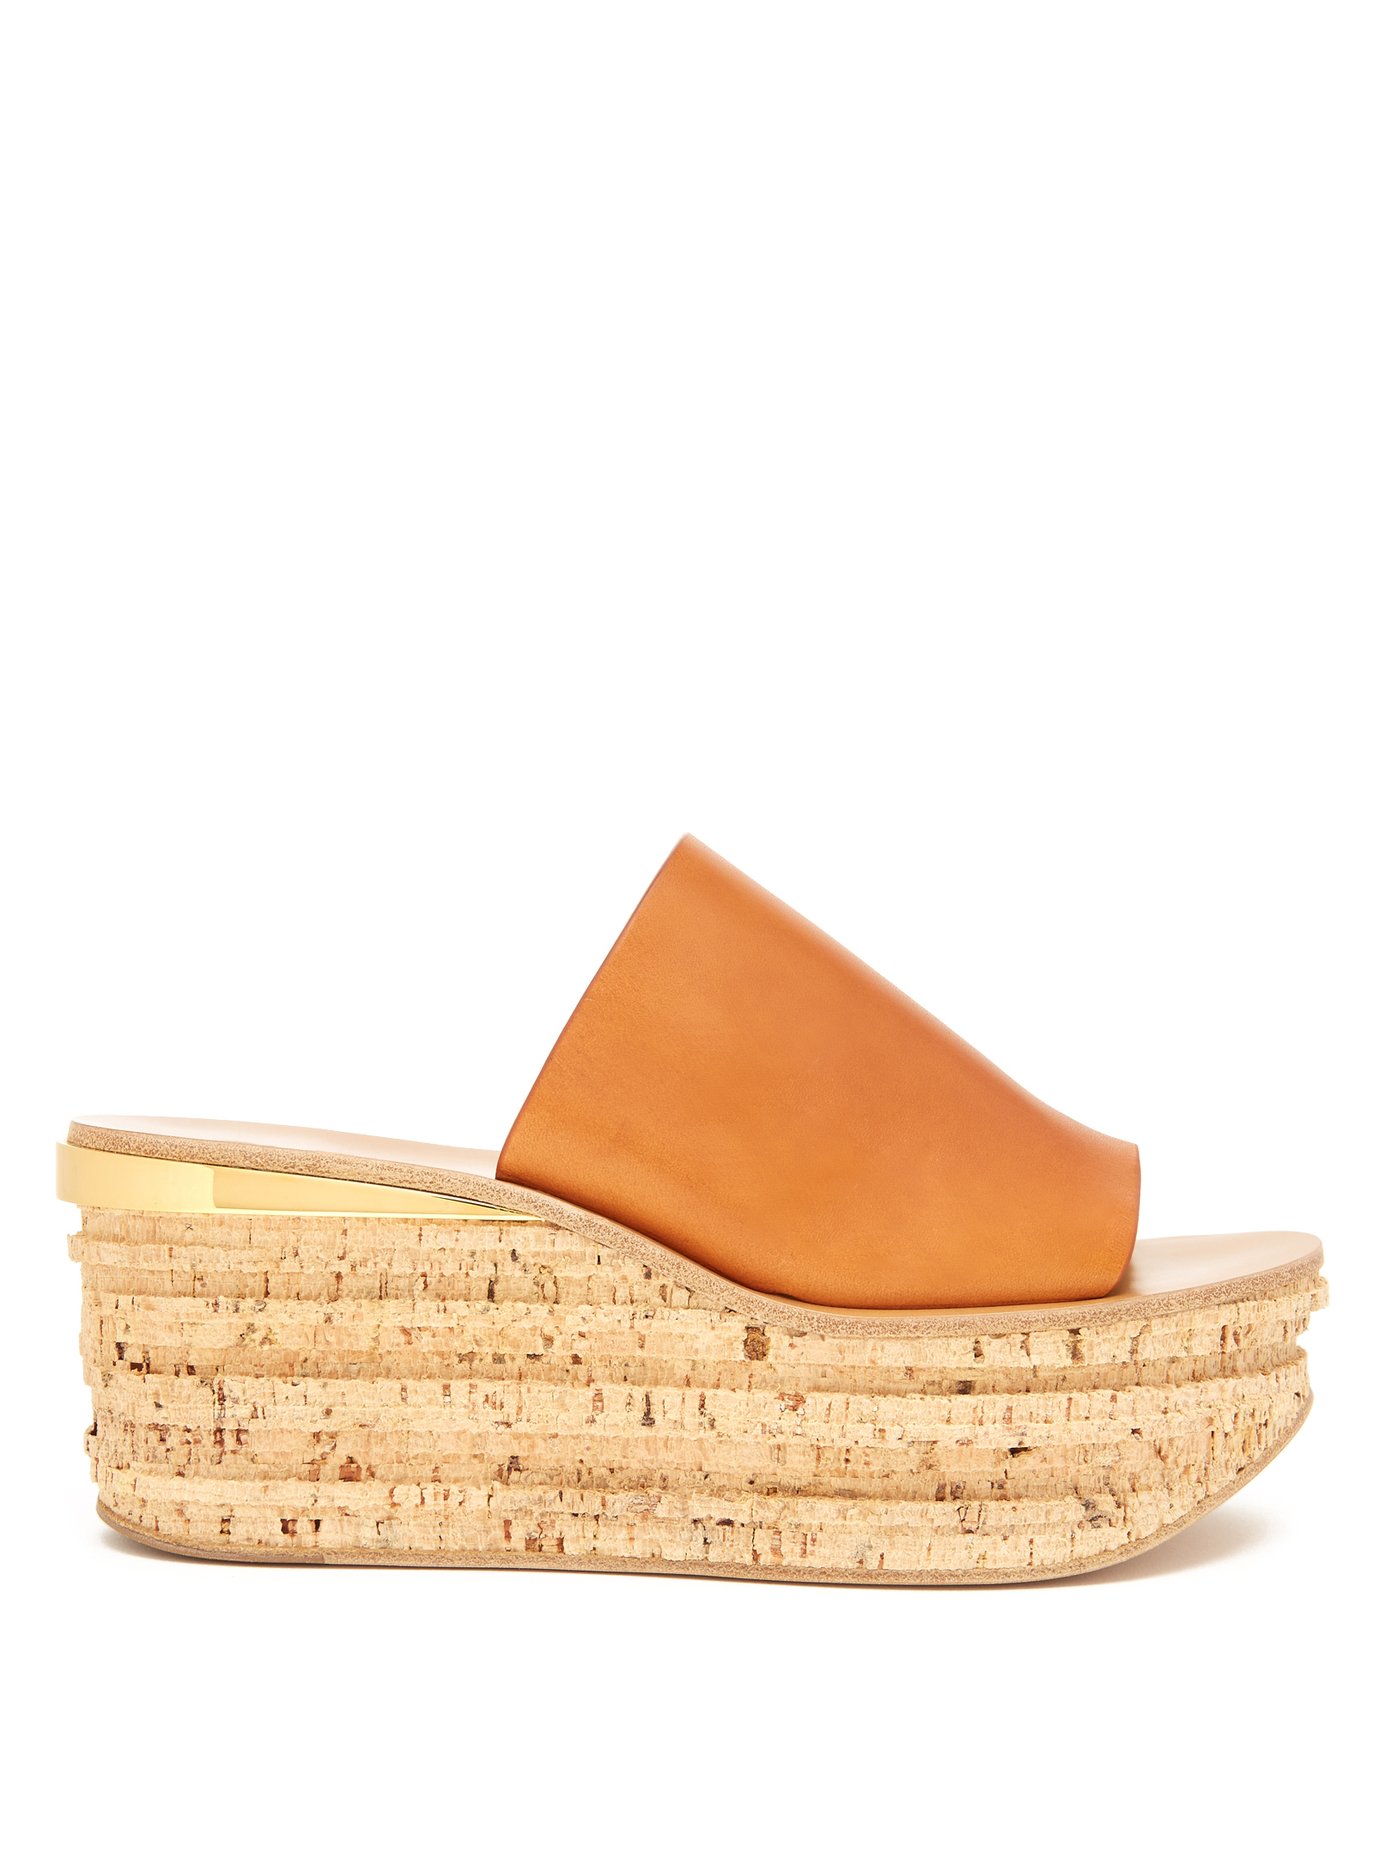 Camille leather wedge mules | Chloé 